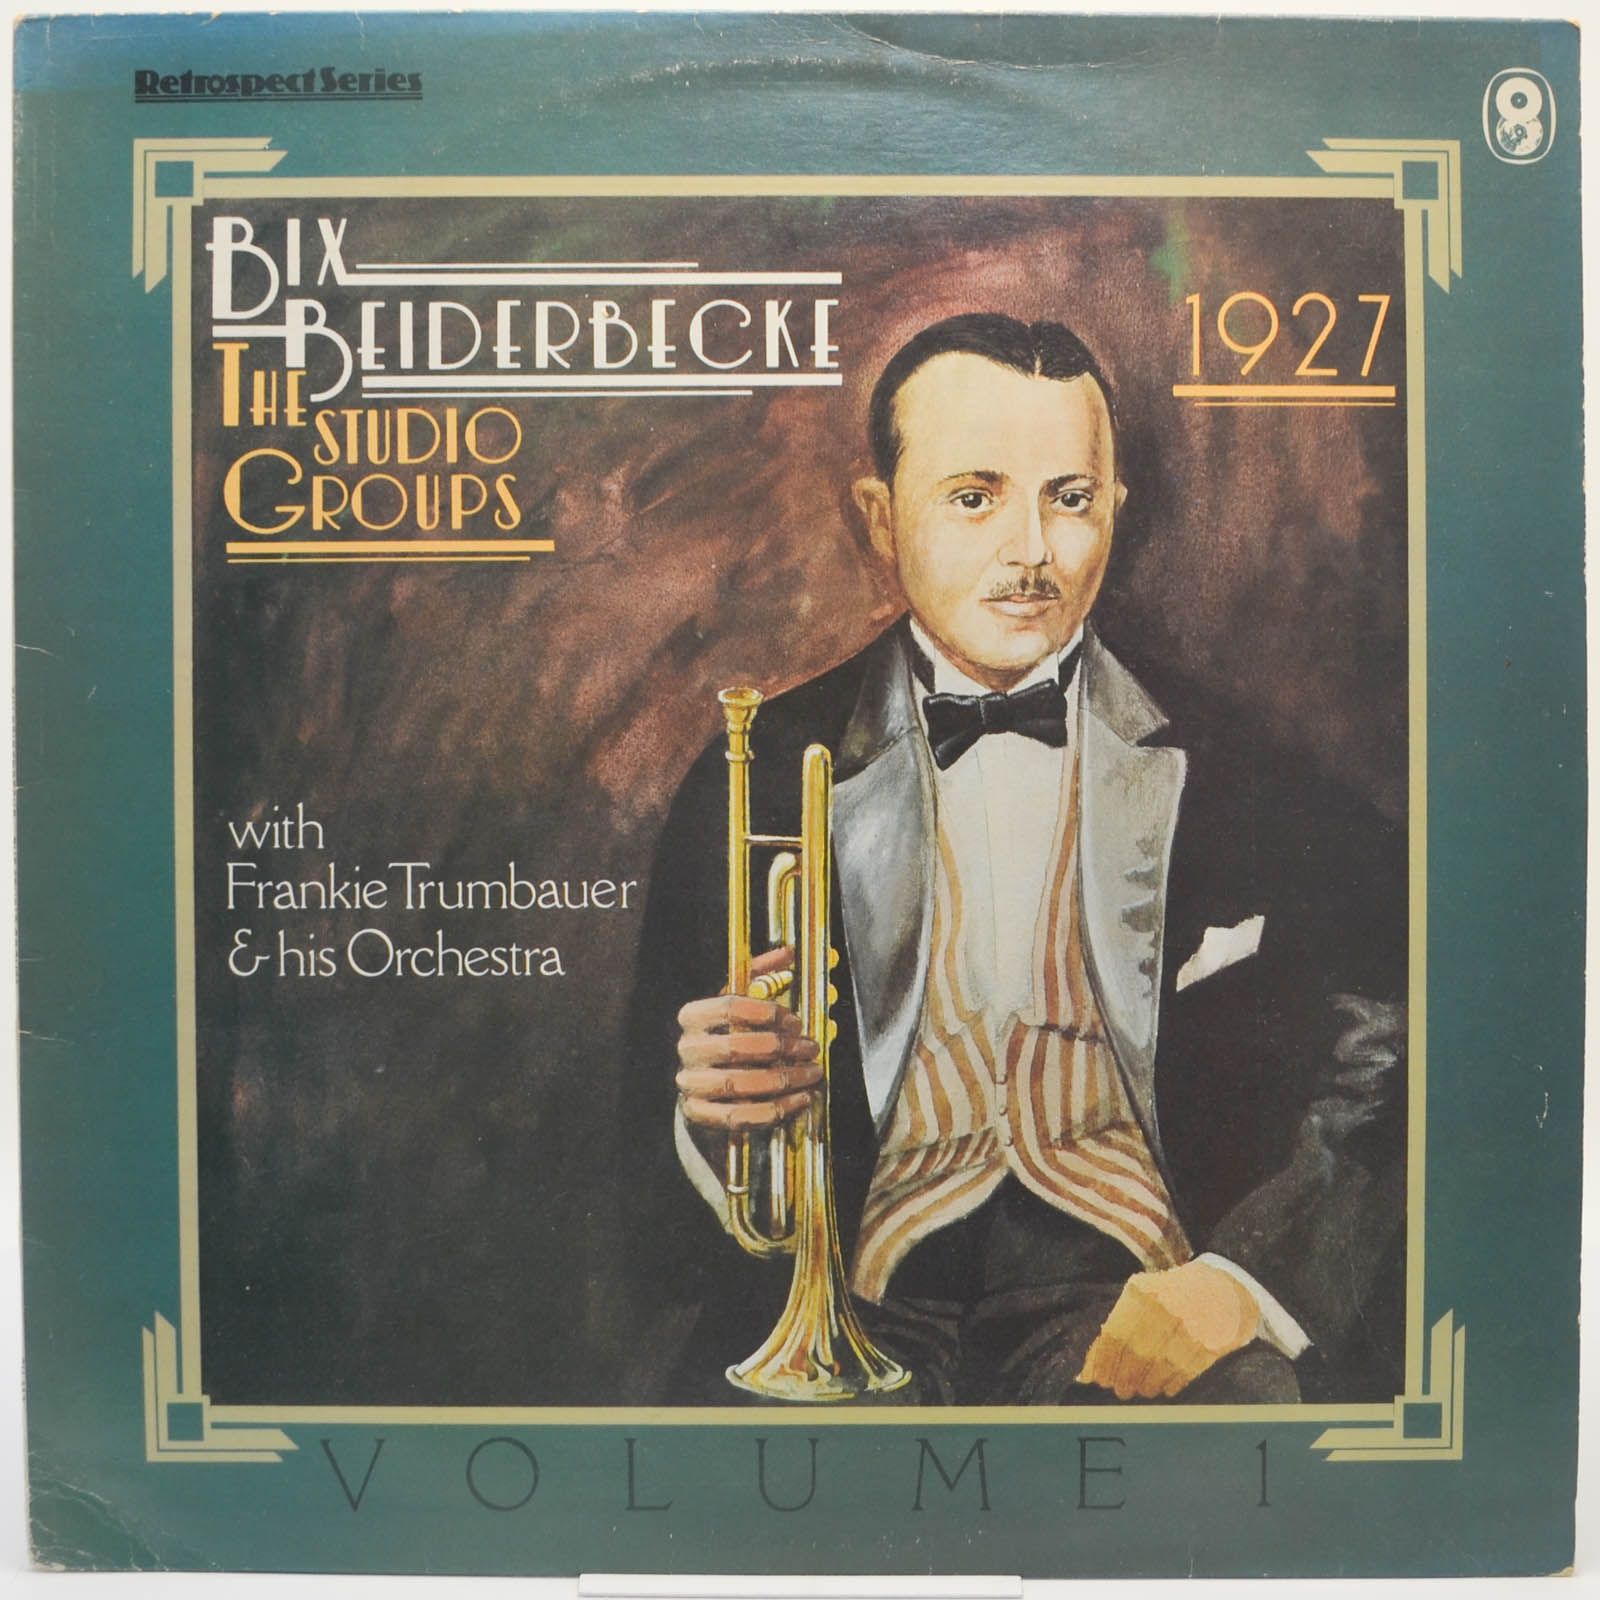 Bix Beiderbecke With Frankie Trumbauer & His Orchestra — The Studio Groups - 1927 (UK), 1981